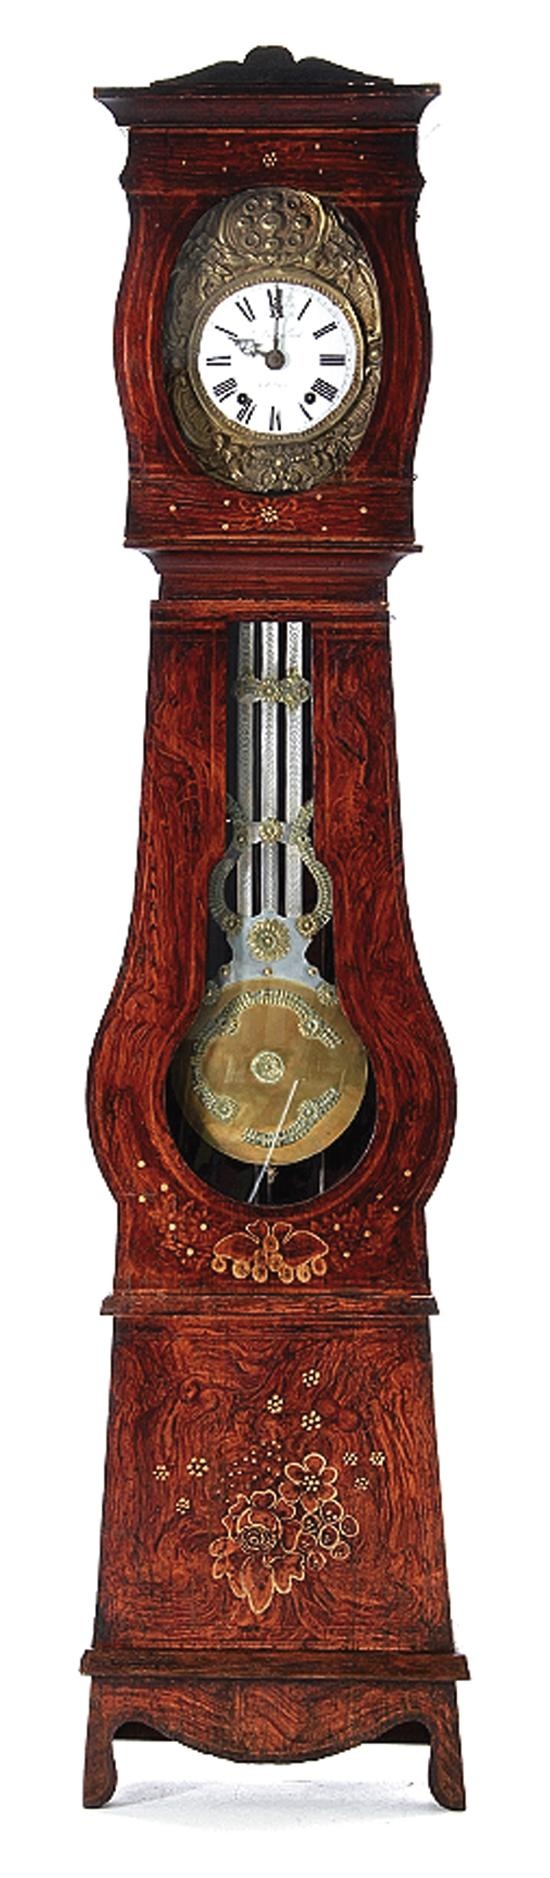 Legacy Antiques Gallery - Antique Clocks/Early Antique French Inlaid Grandfather...